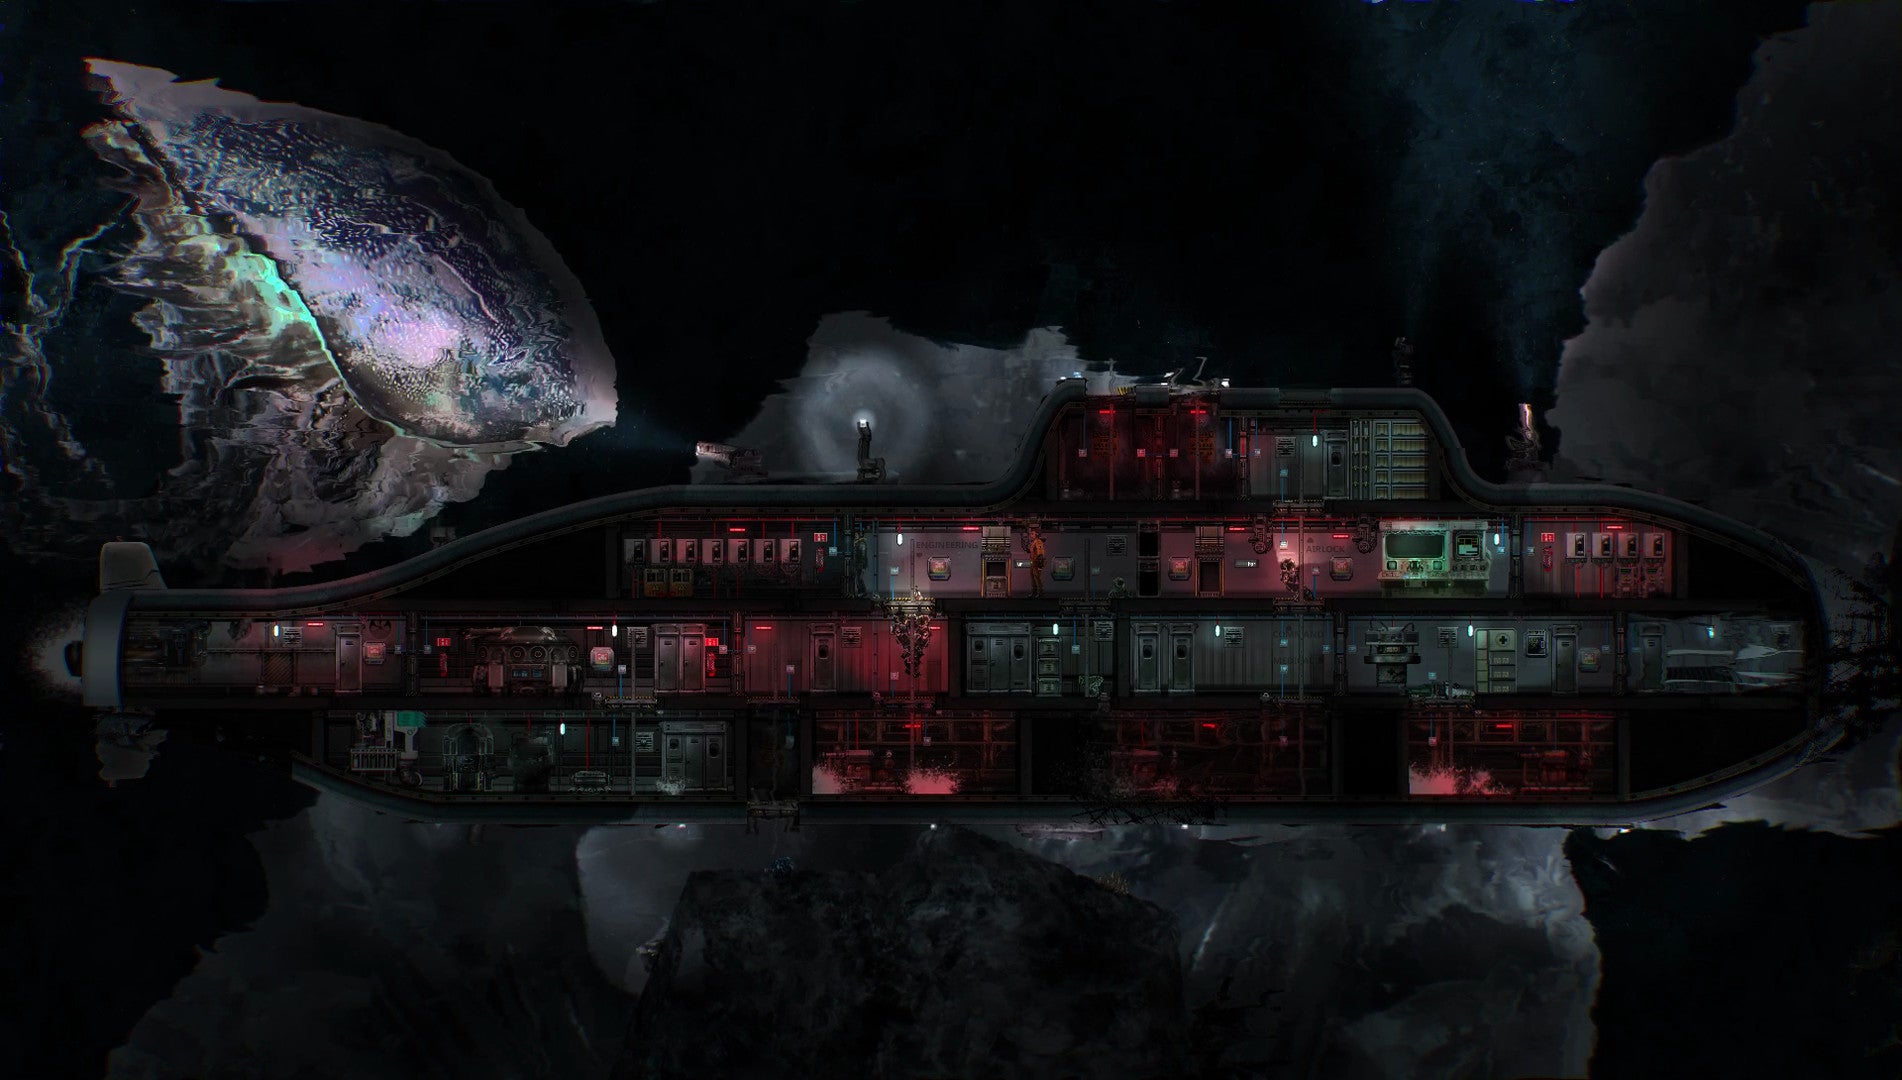 Co-op sub sim Barotrauma will leave early access this spring